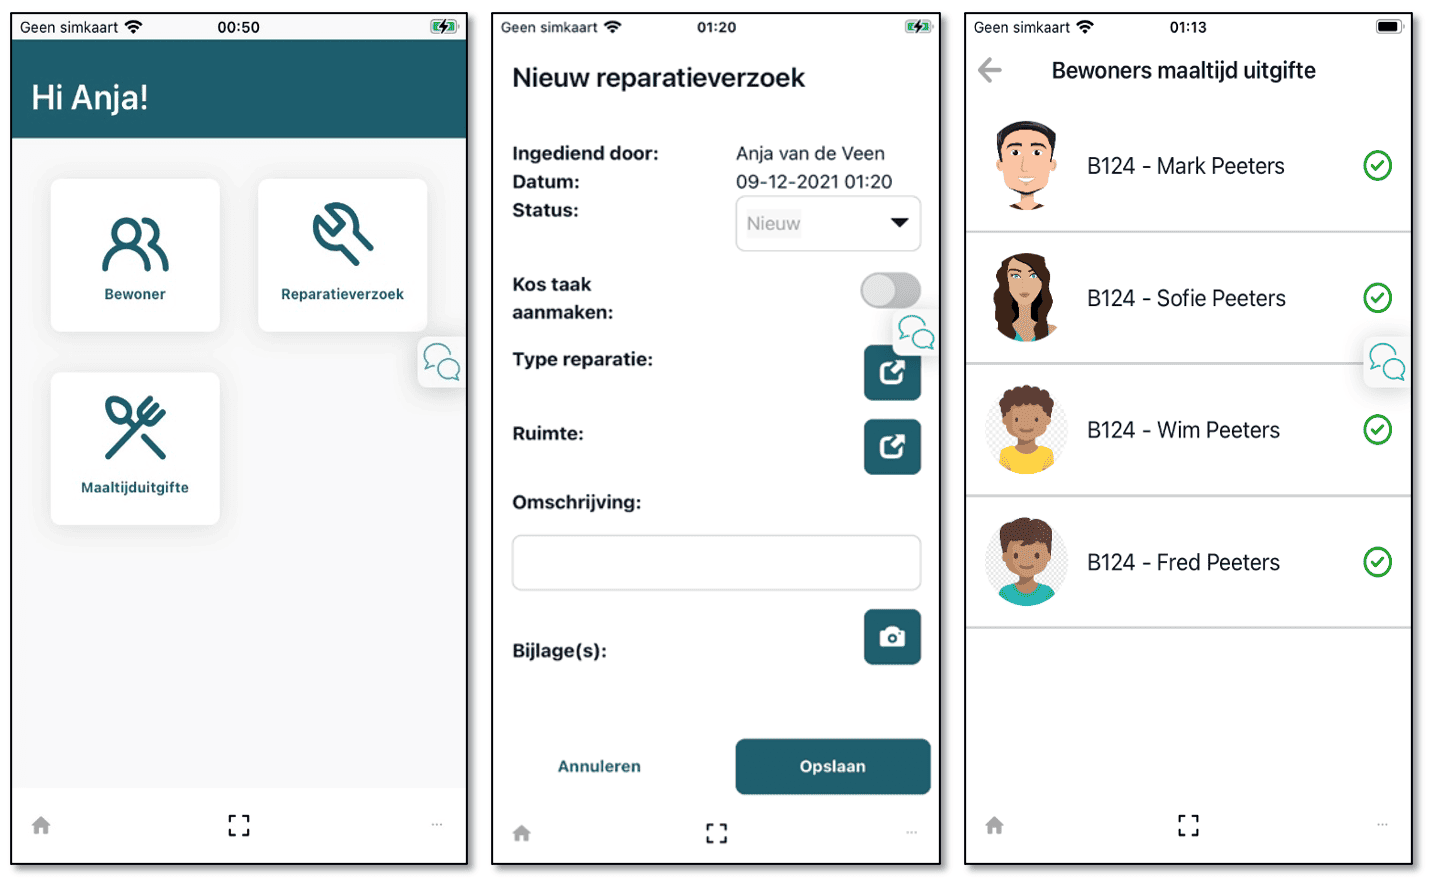 Employee Mobile Application displays meal distribution, resident information, and maintenance requests